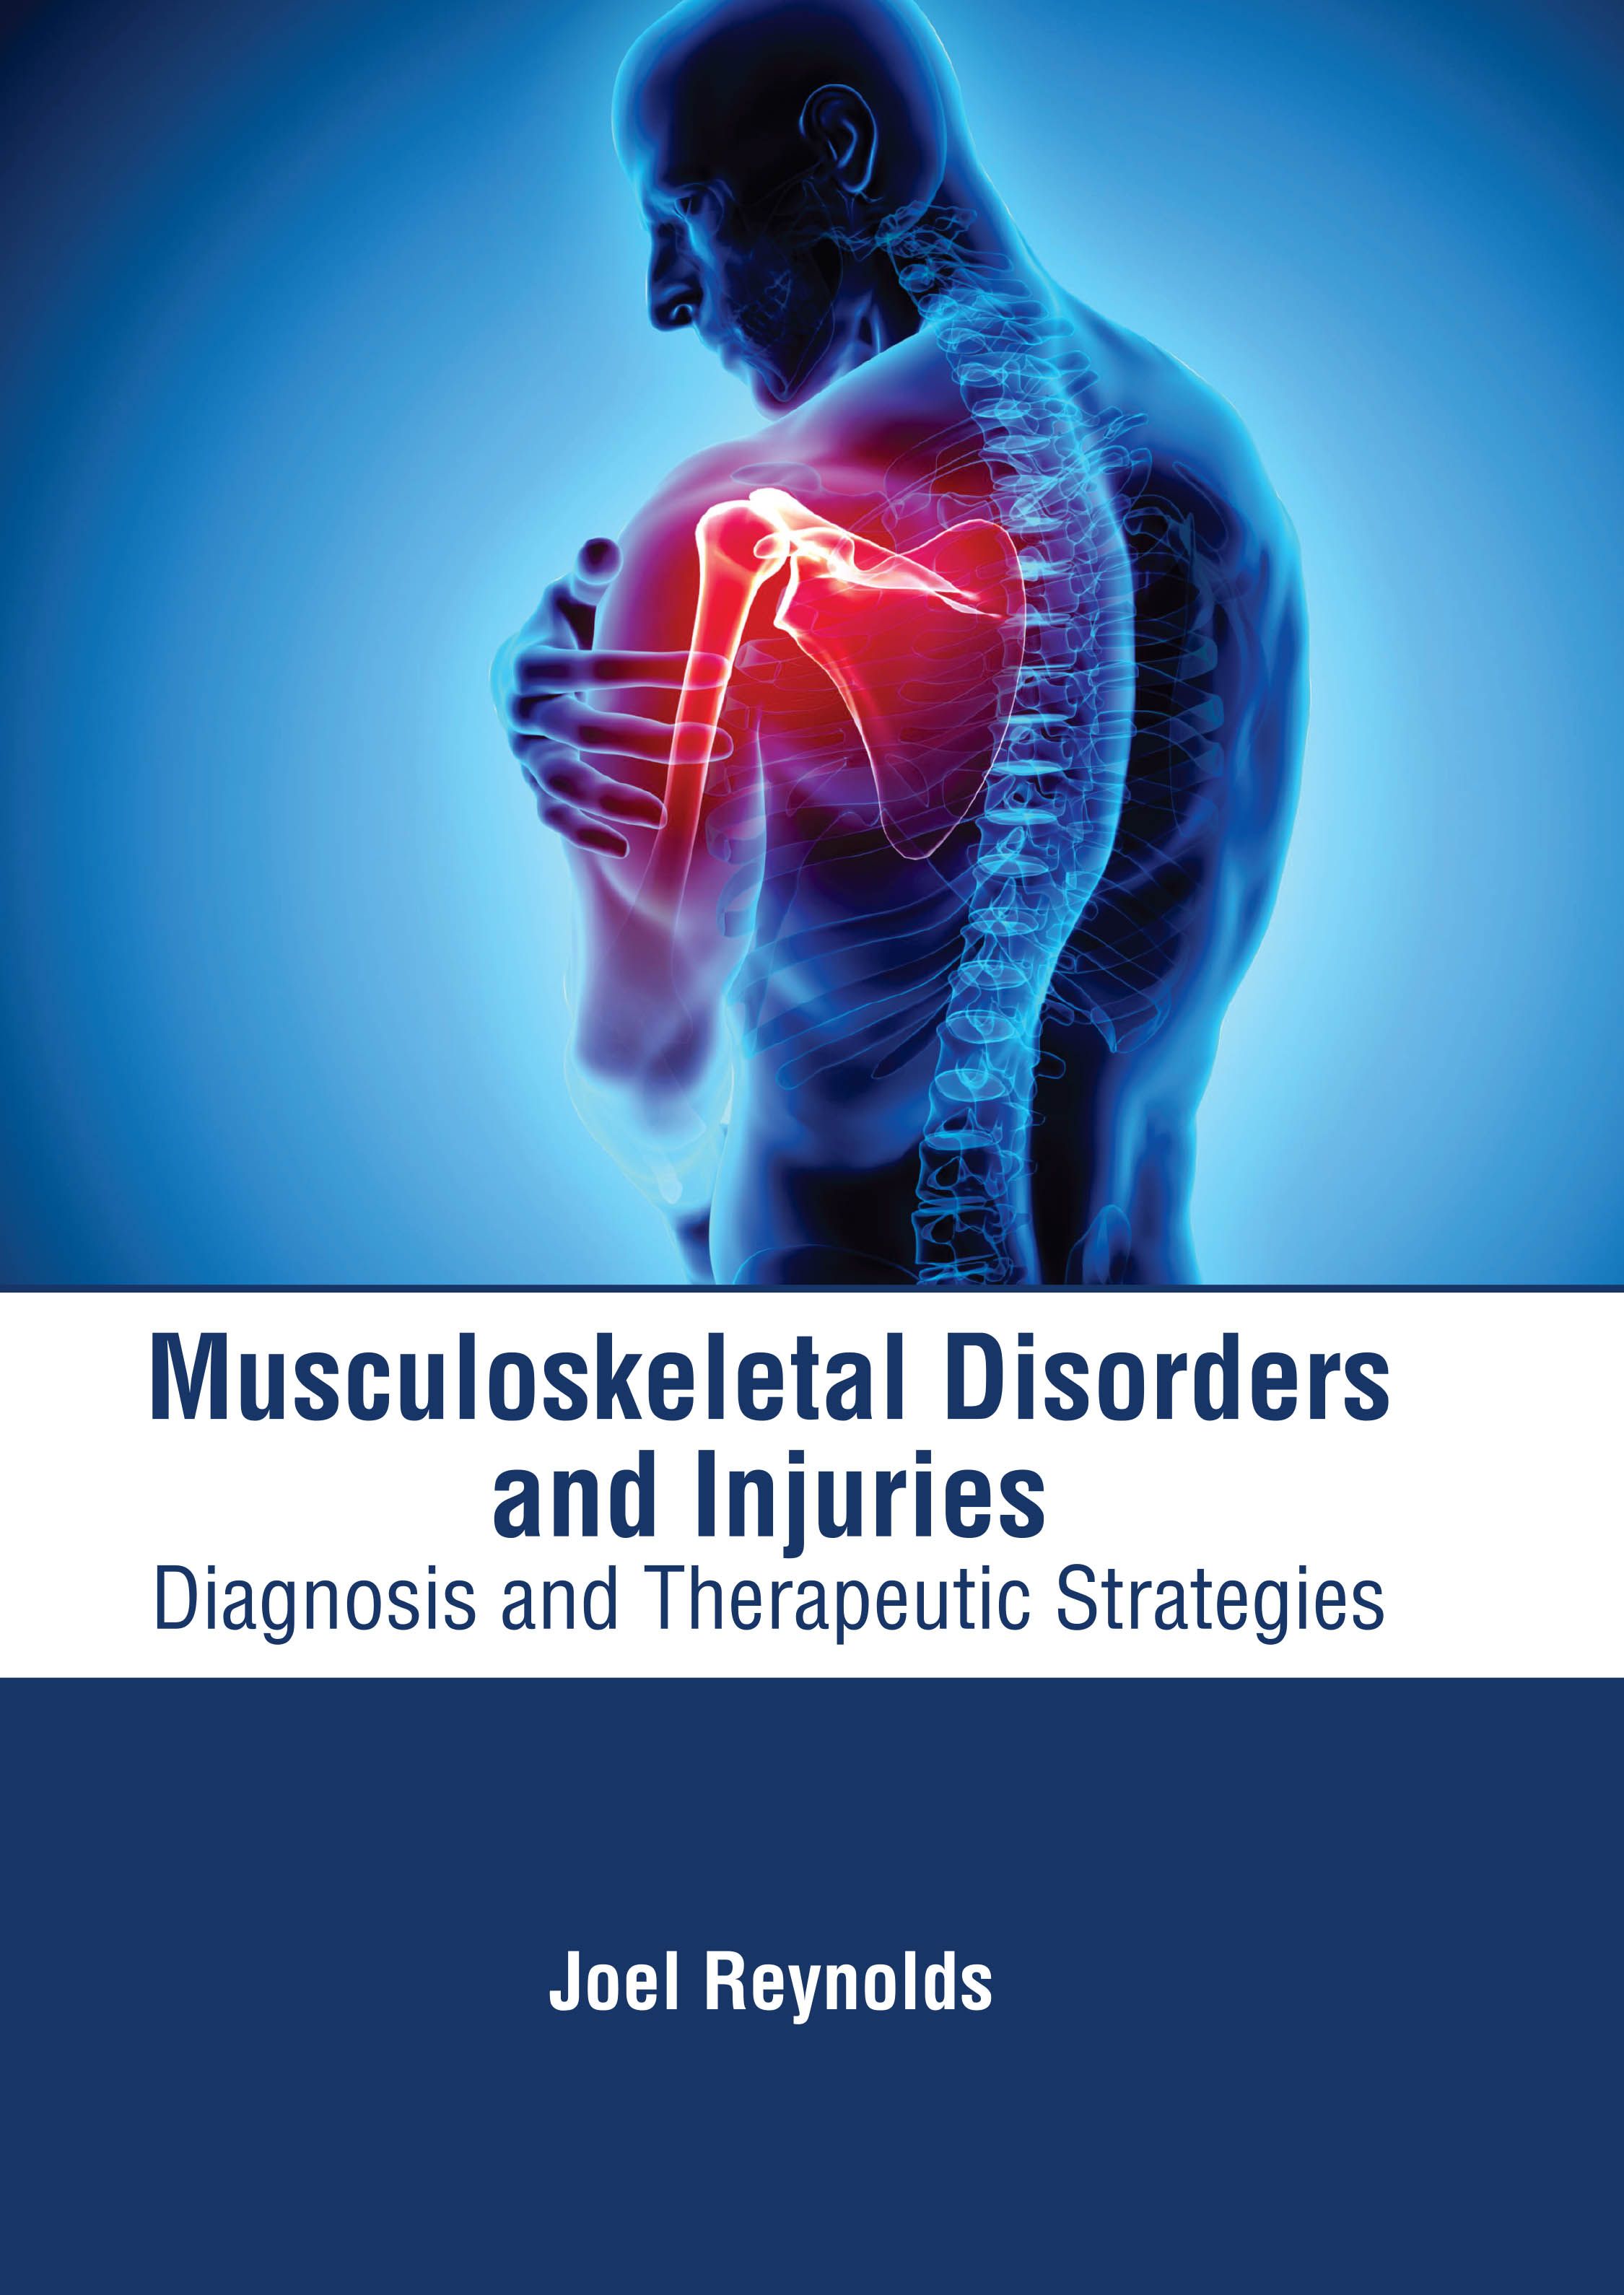 MUSCULOSKELETAL DISORDERS AND INJURIES: DIAGNOSIS AND THERAPEUTIC STRATEGIES- ISBN: 9781639274000